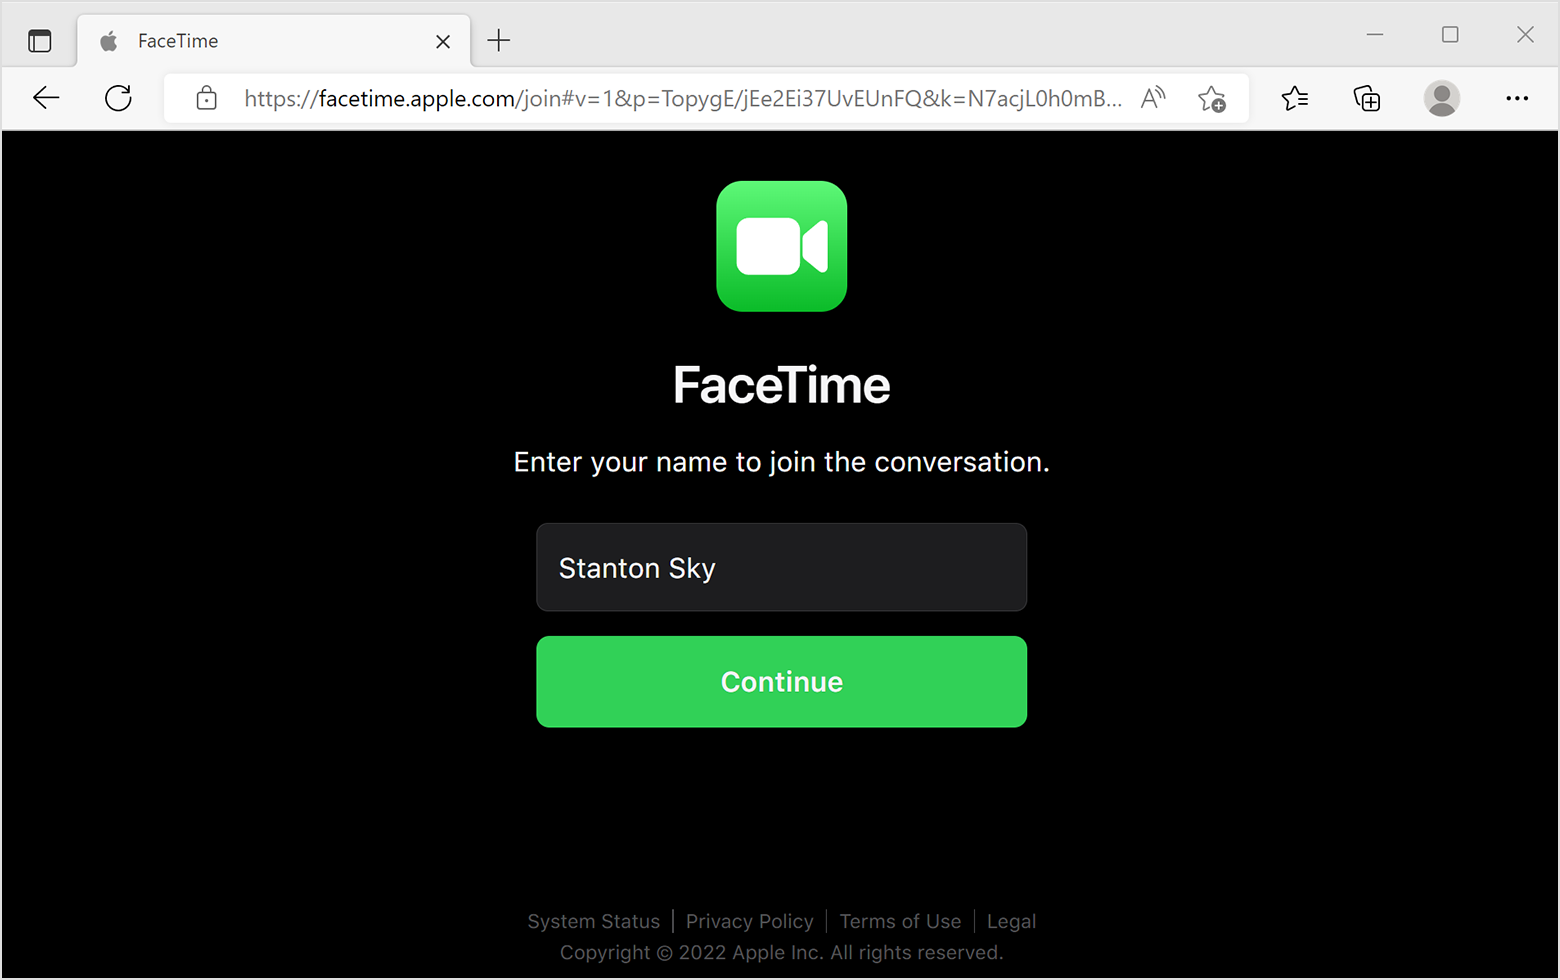 FaceTime browser window: Enter your name